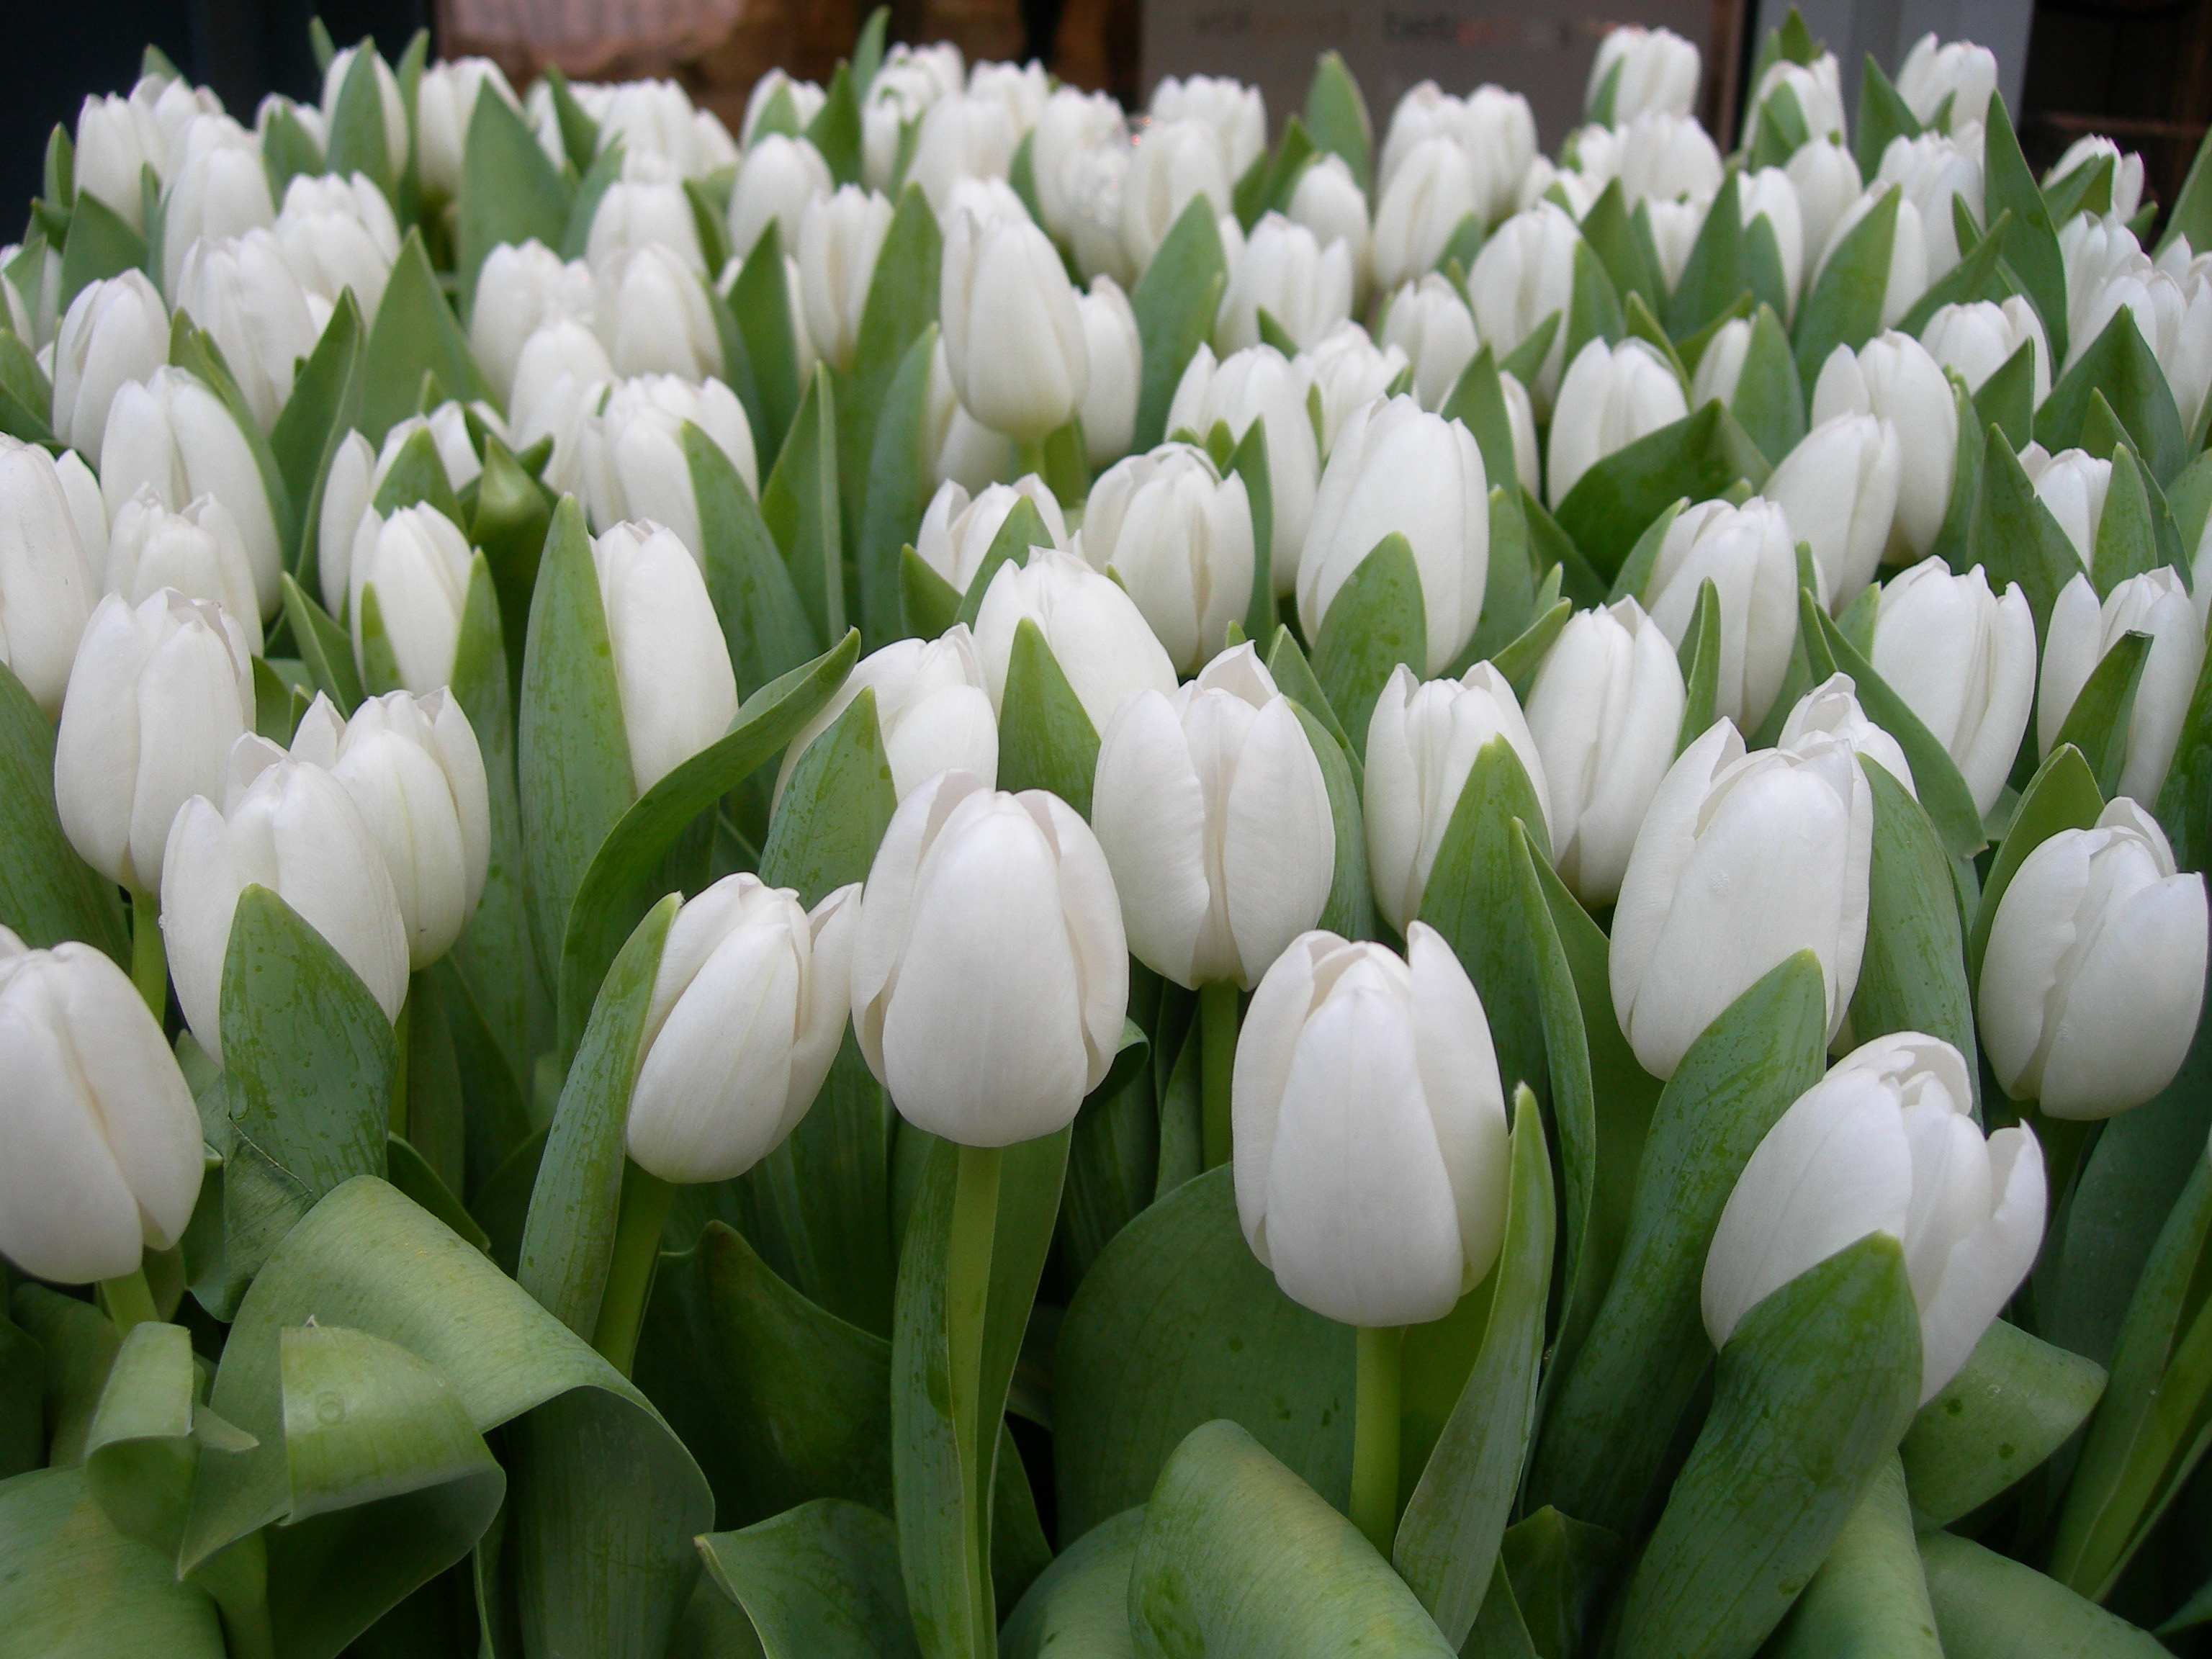 Cool-White-Tulips-Field-Free-Desktop-Pictures